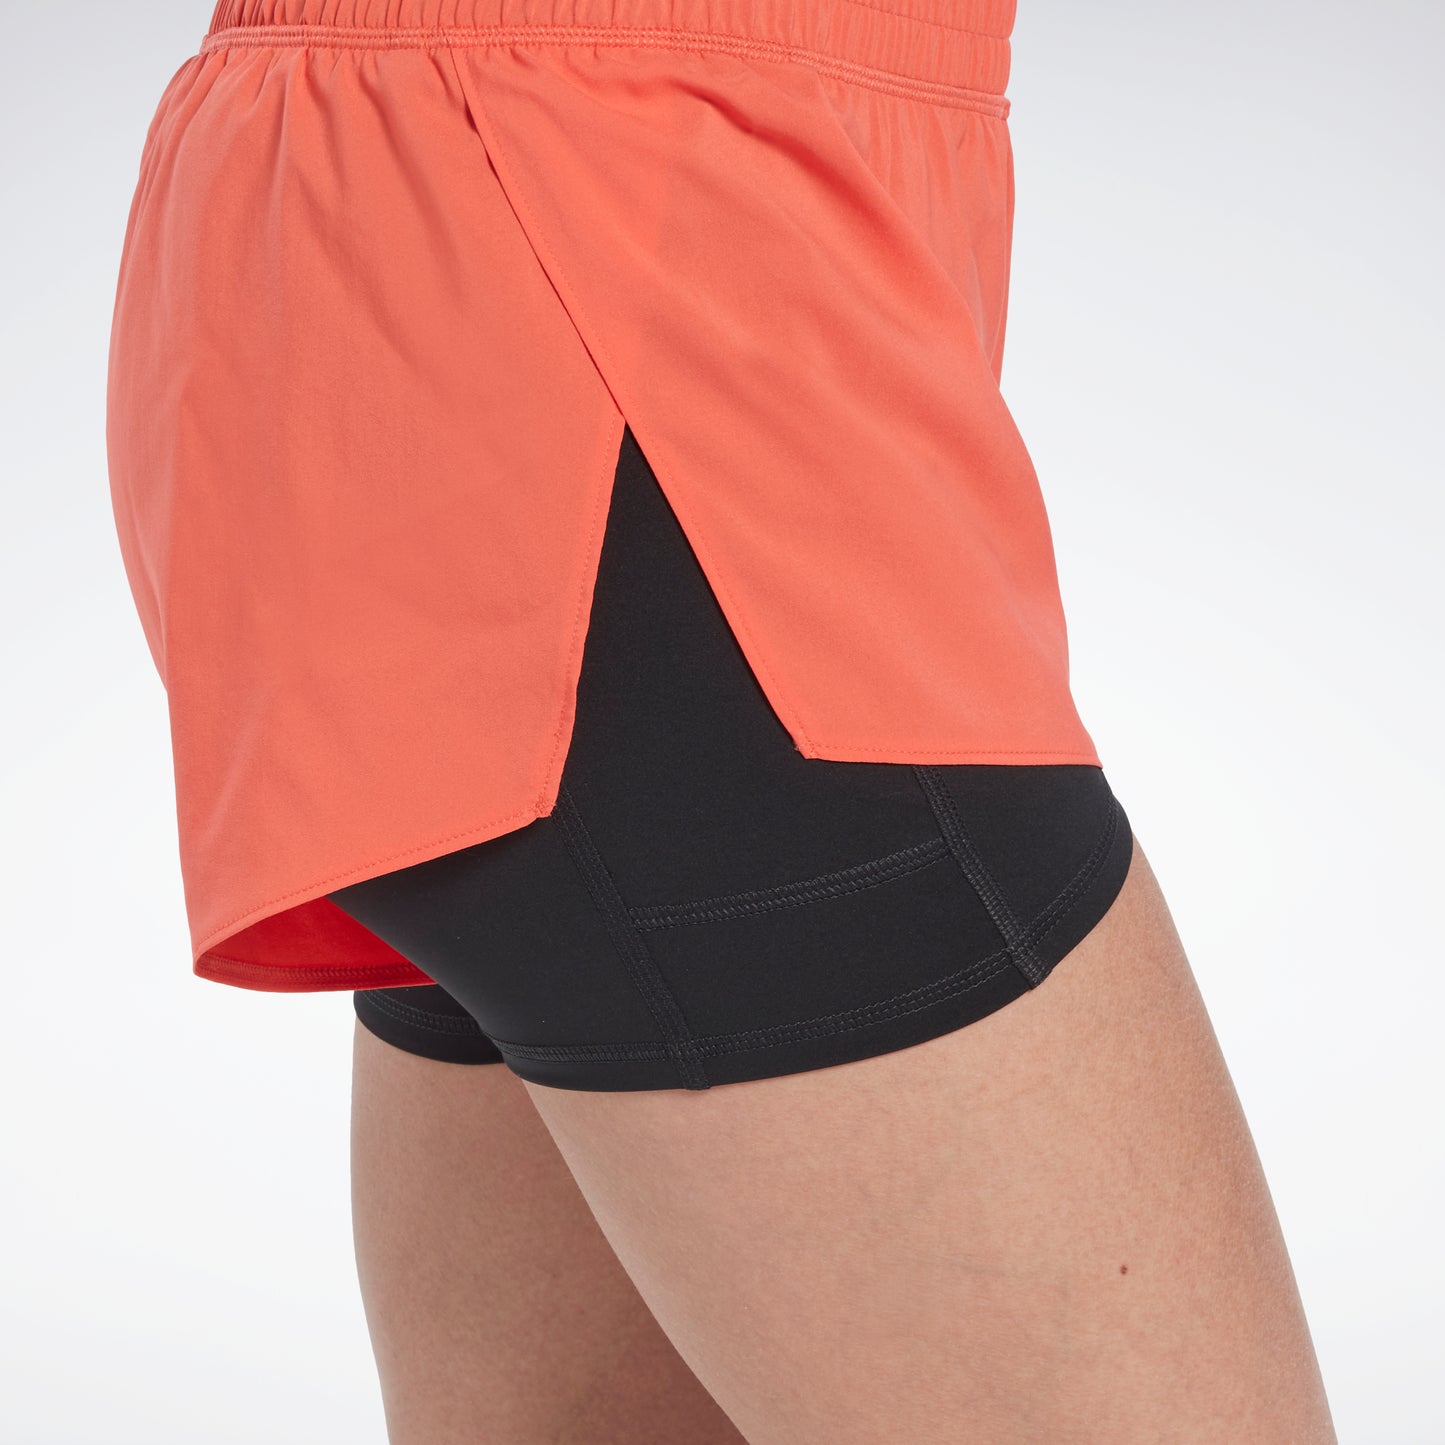 Women Running Shorts 2-in-1 with Pocket Wide Waistband Coverage